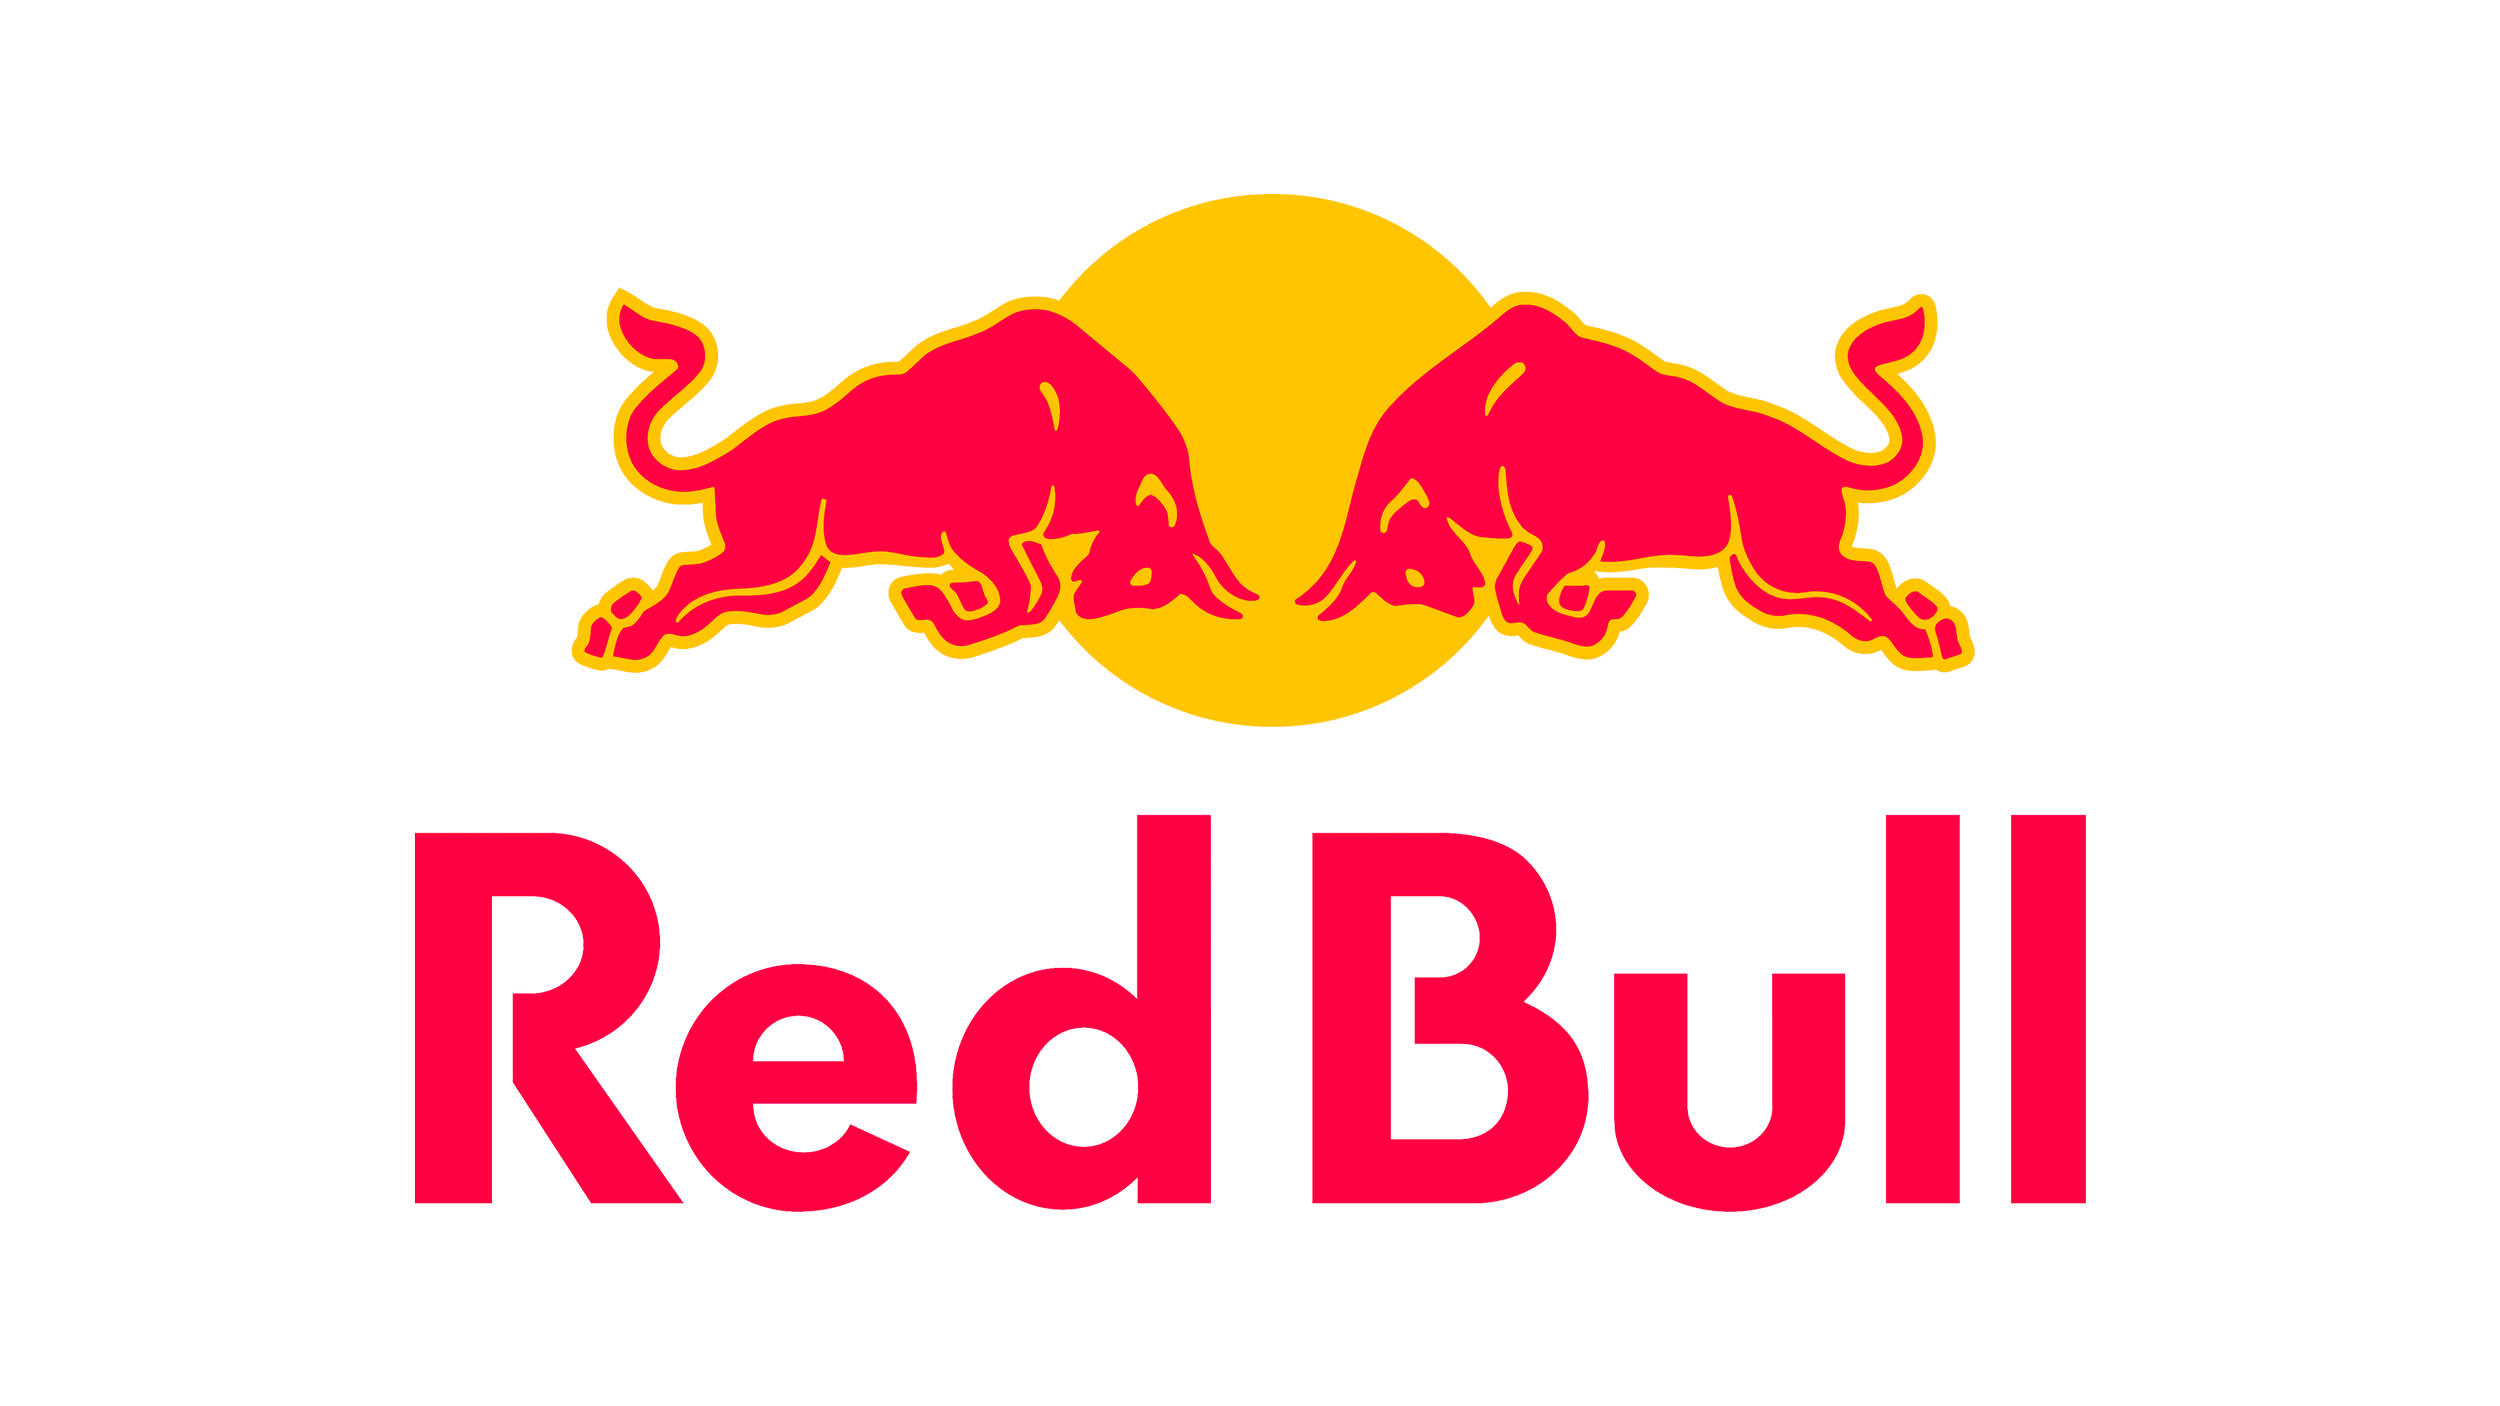 Red Bull.png